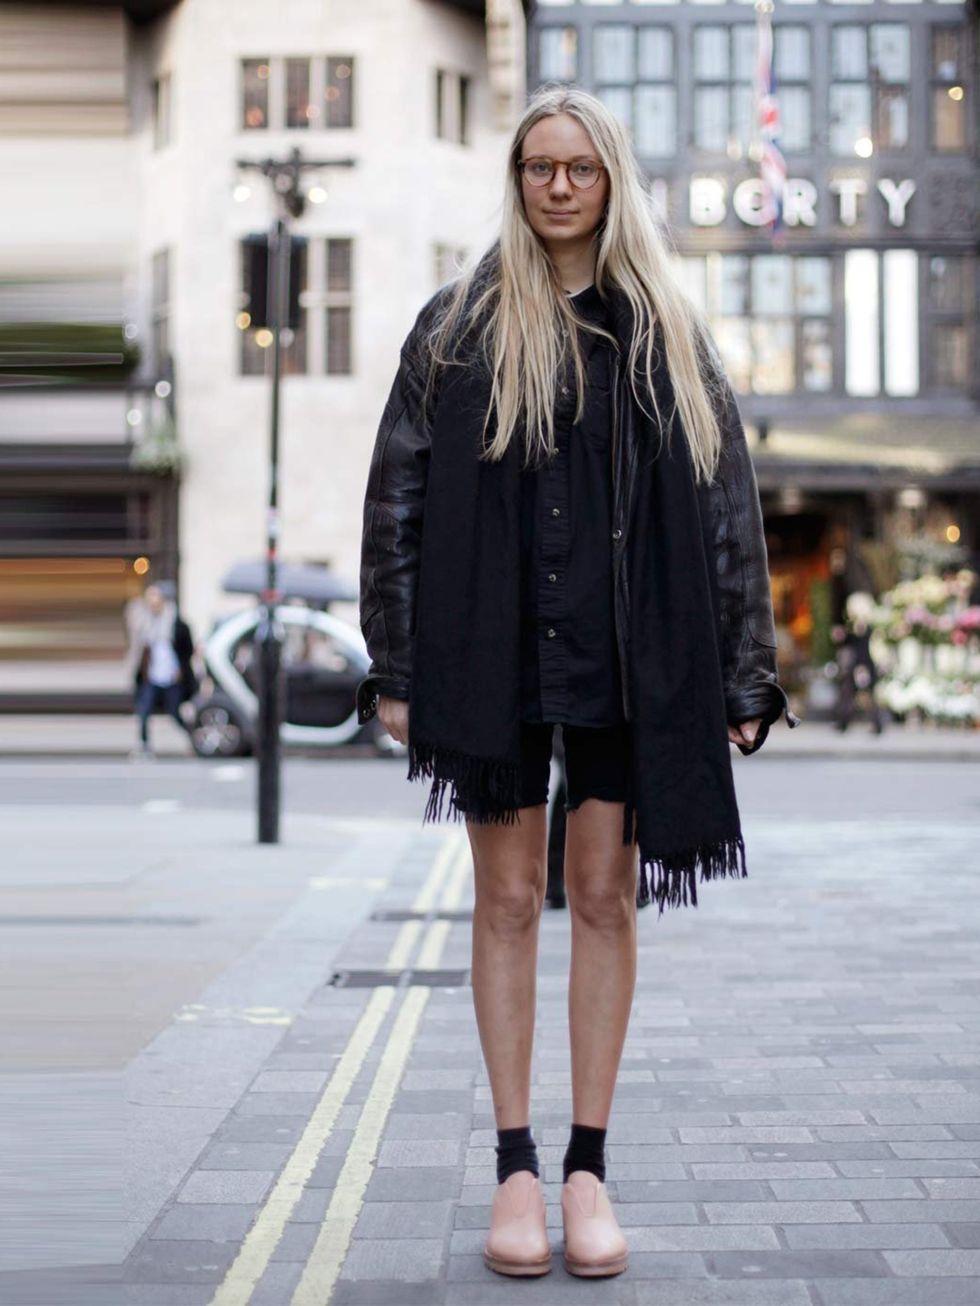 <p>Claudia, 25, Intern. Like Mary scarf, vintage jacket, Cheap Monday shorts, Acne shoes, American Apparel bag.</p>